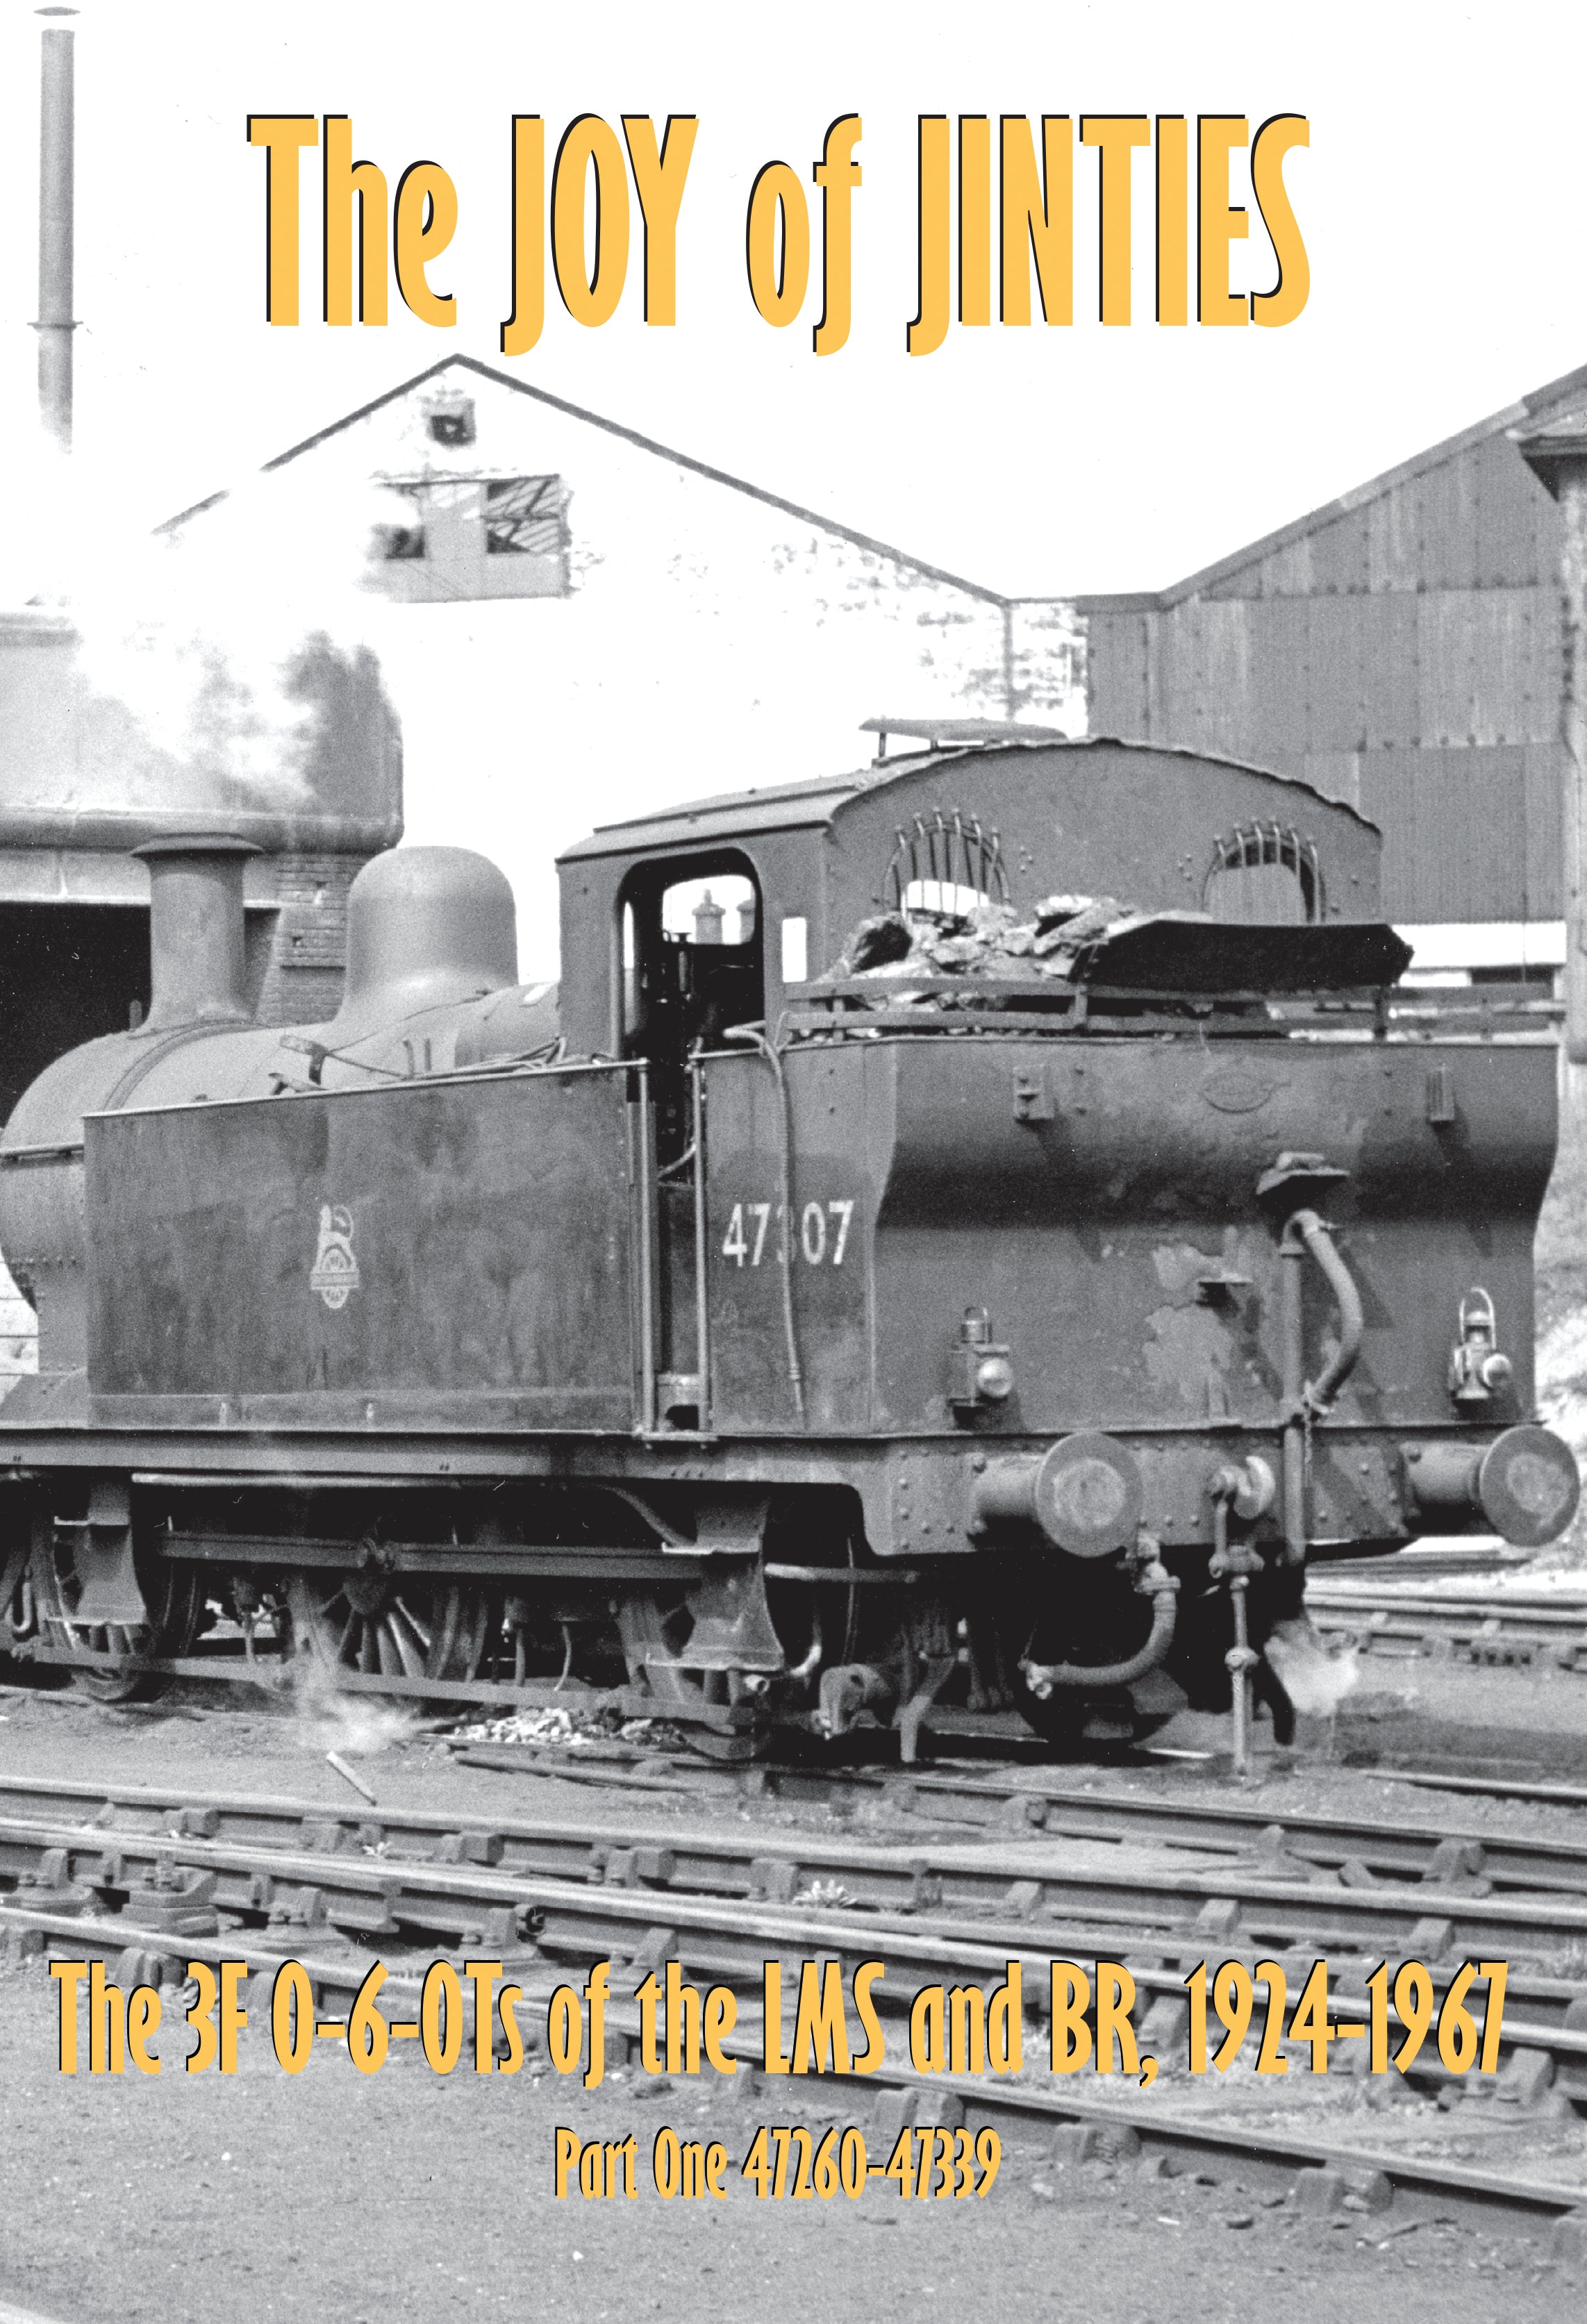 The Joy of Jinties: The 3F 0-6-0Ts of the LMS and BR, 1924-1967 Part 1: 47260-47339